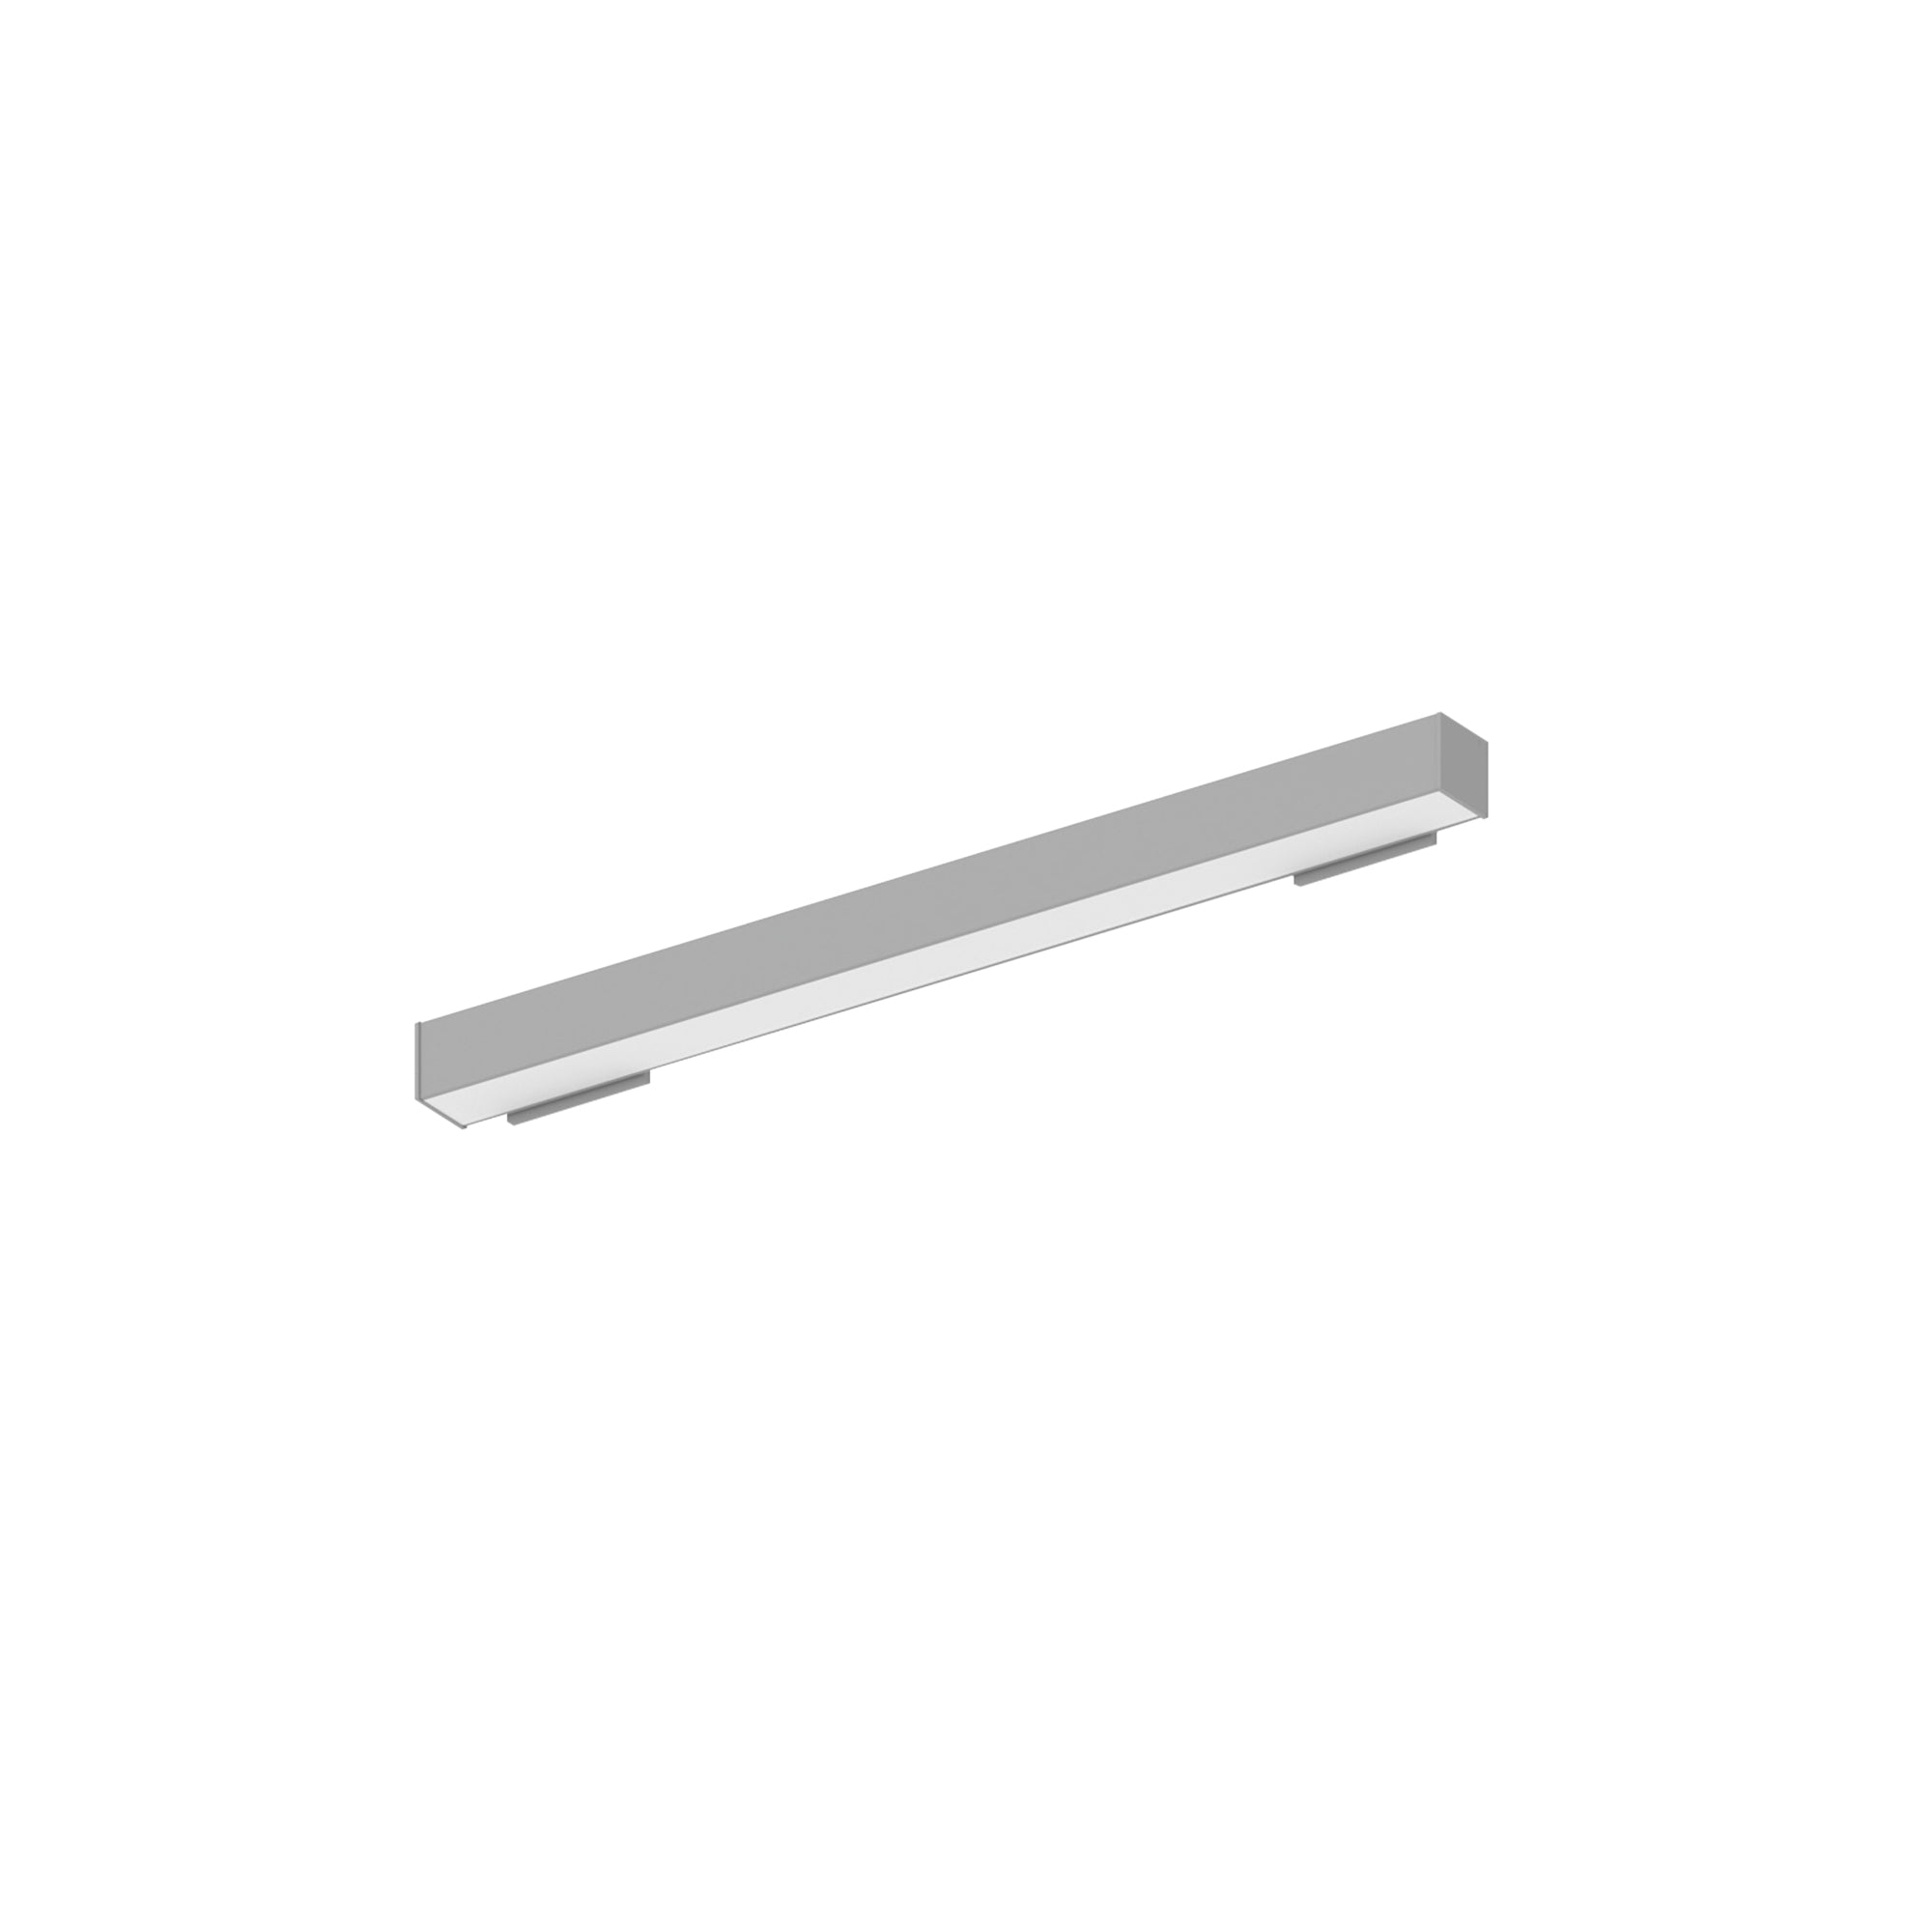 Nora Lighting NWLIN-21040A/L2-R2P - Linear - 2' L-Line LED Wall Mount Linear, 2100lm / 4000K, 2 Inchx4 Inch Left Plate & 2 Inchx4 Inch Right Plate, Right Power Feed, Aluminum Finish